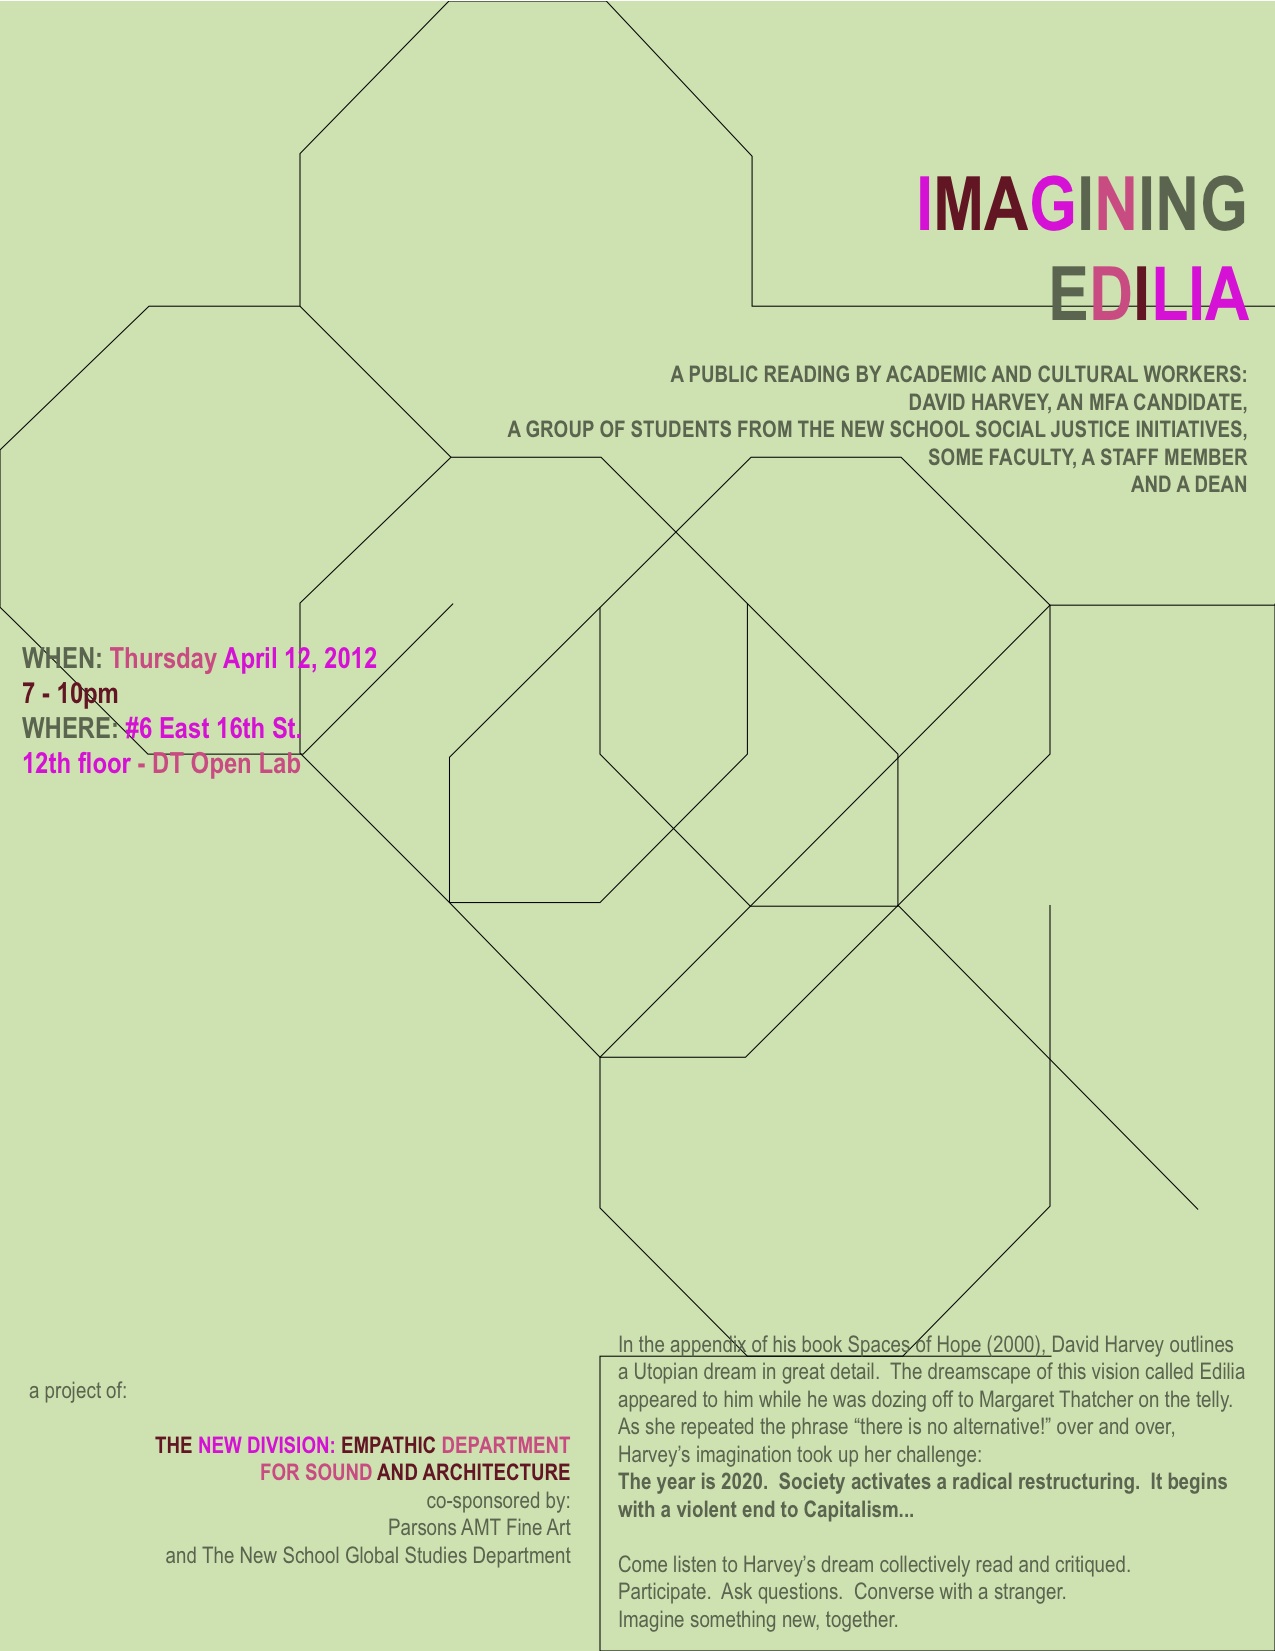 IMAGINING EDILIA: A PUBLIC READING  BY ACADEMIC AND CULTURAL WORKERS